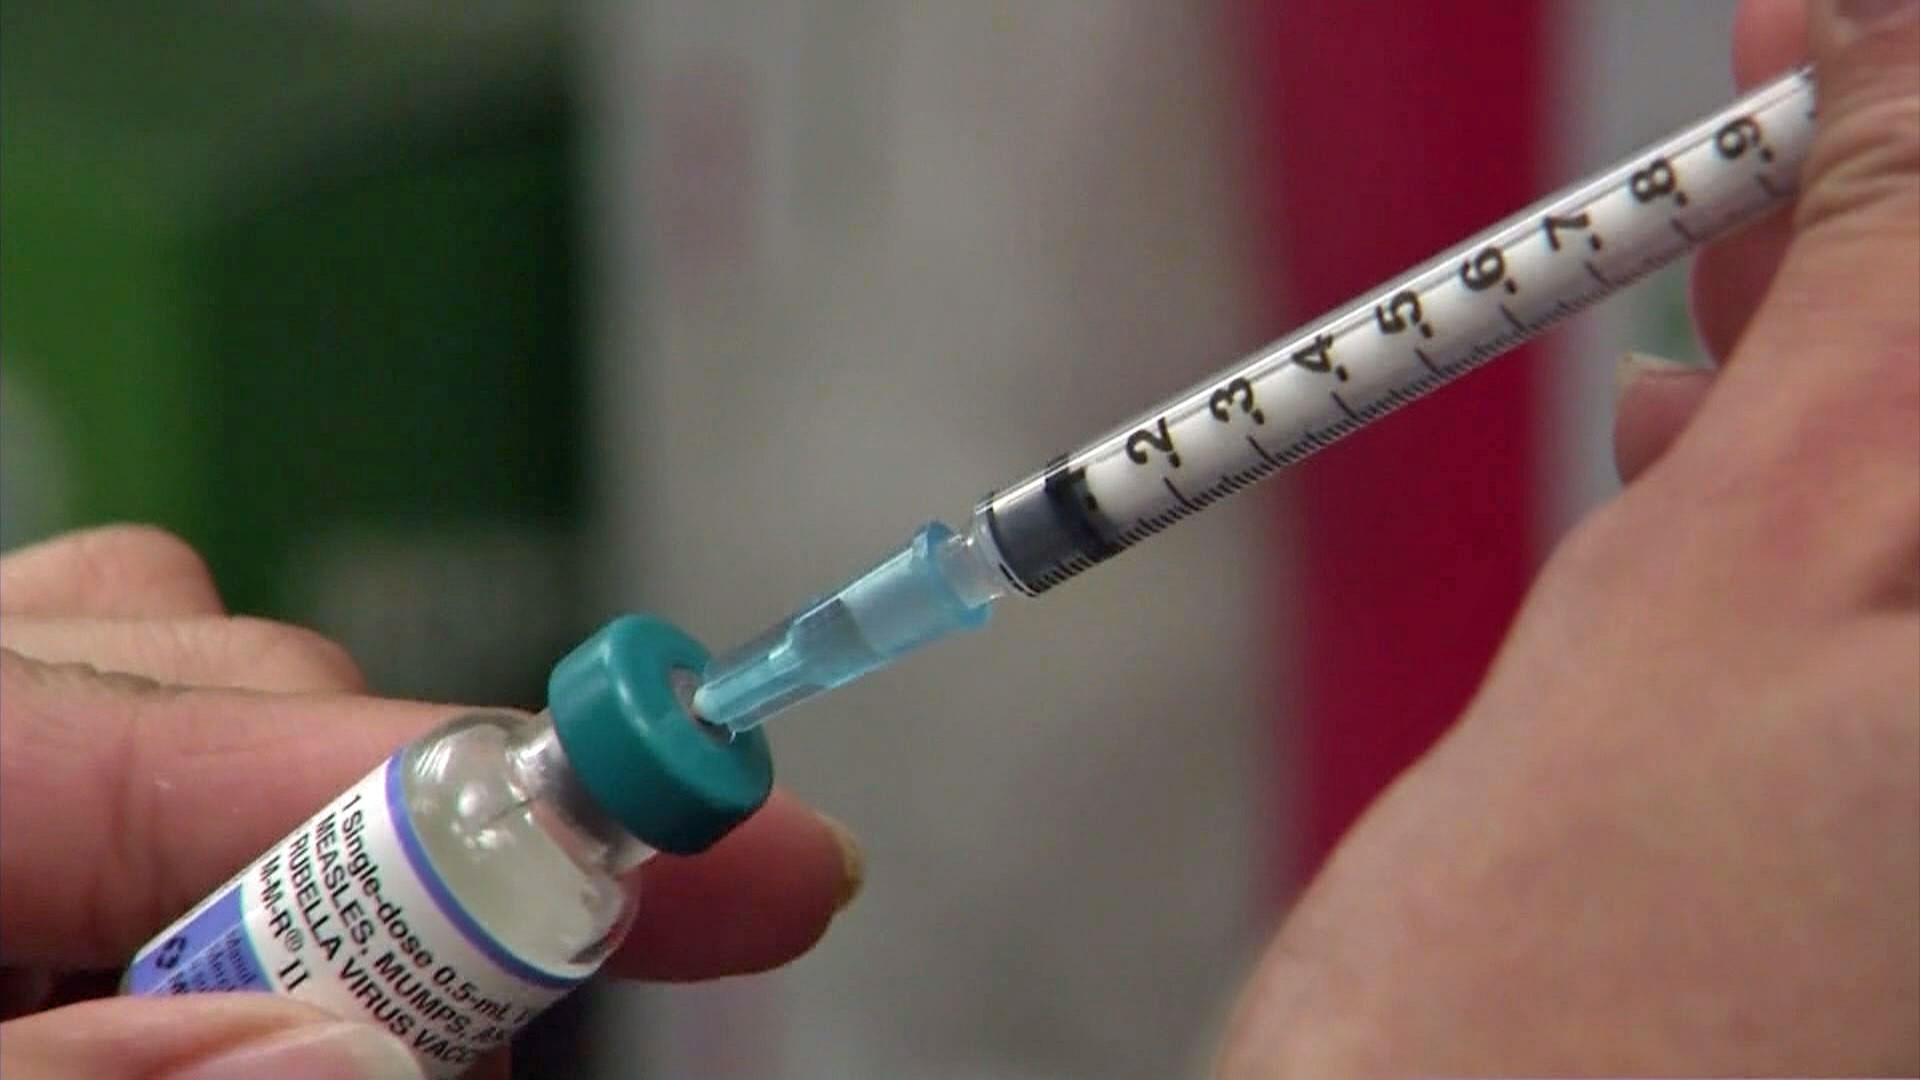 After 5 measles cases were confirmed in Montgomery, Harris and Galveston counties, viewers expressed their concerns about vaccines. So we went to the experts to get some questions answered.